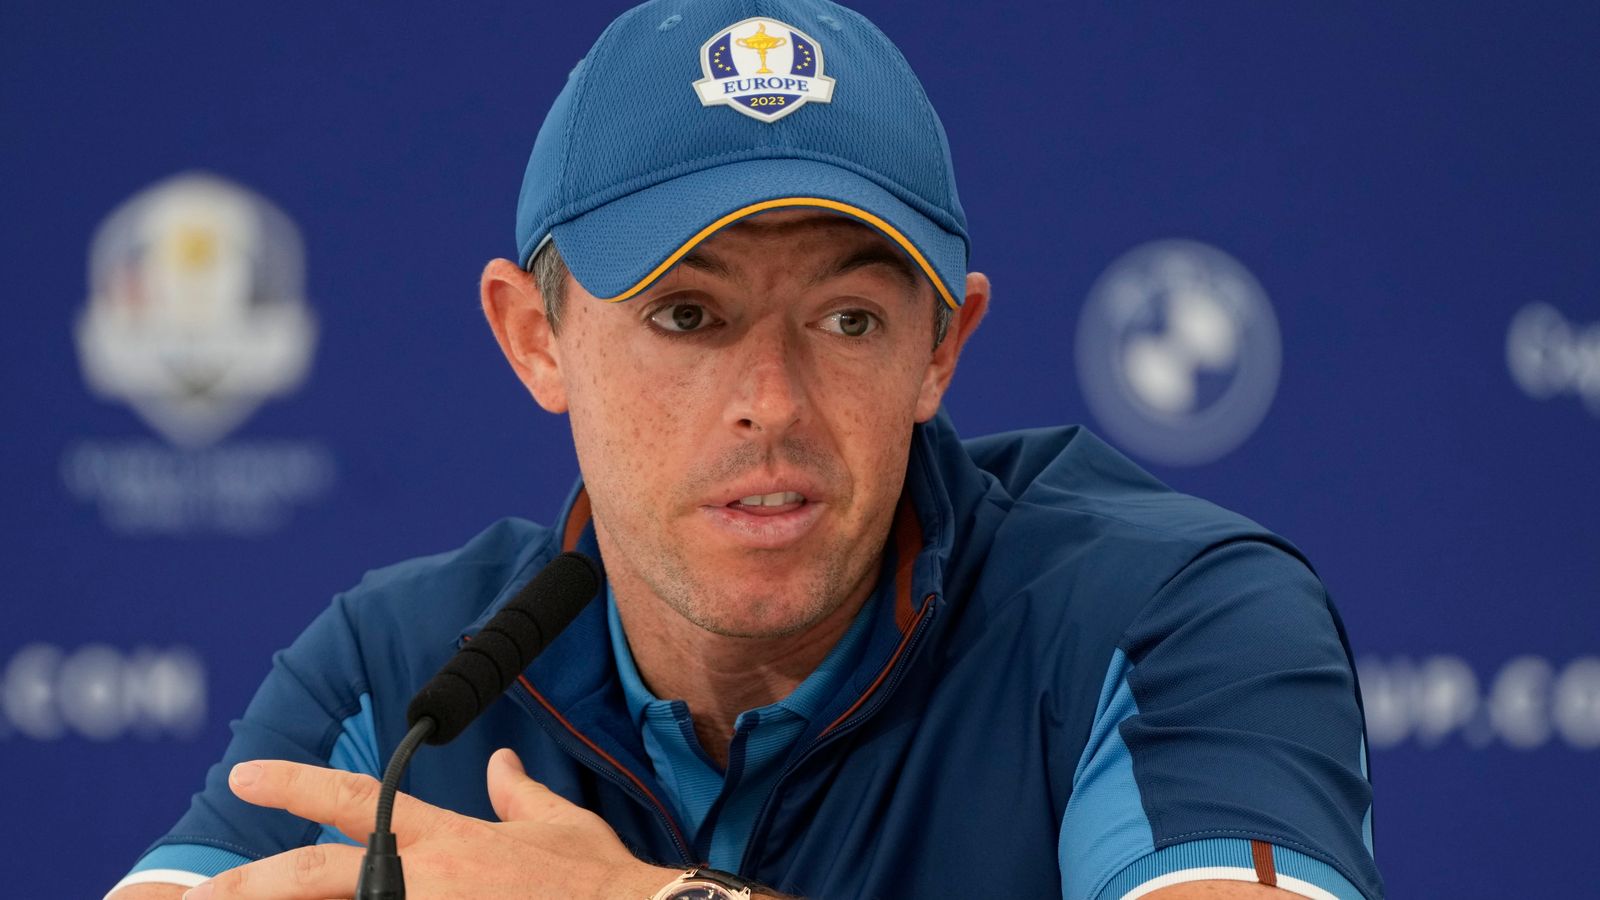 Ryder Cup: Rory McIlroy believes LIV players will miss being involved with Team Europe in Rome | Golf News